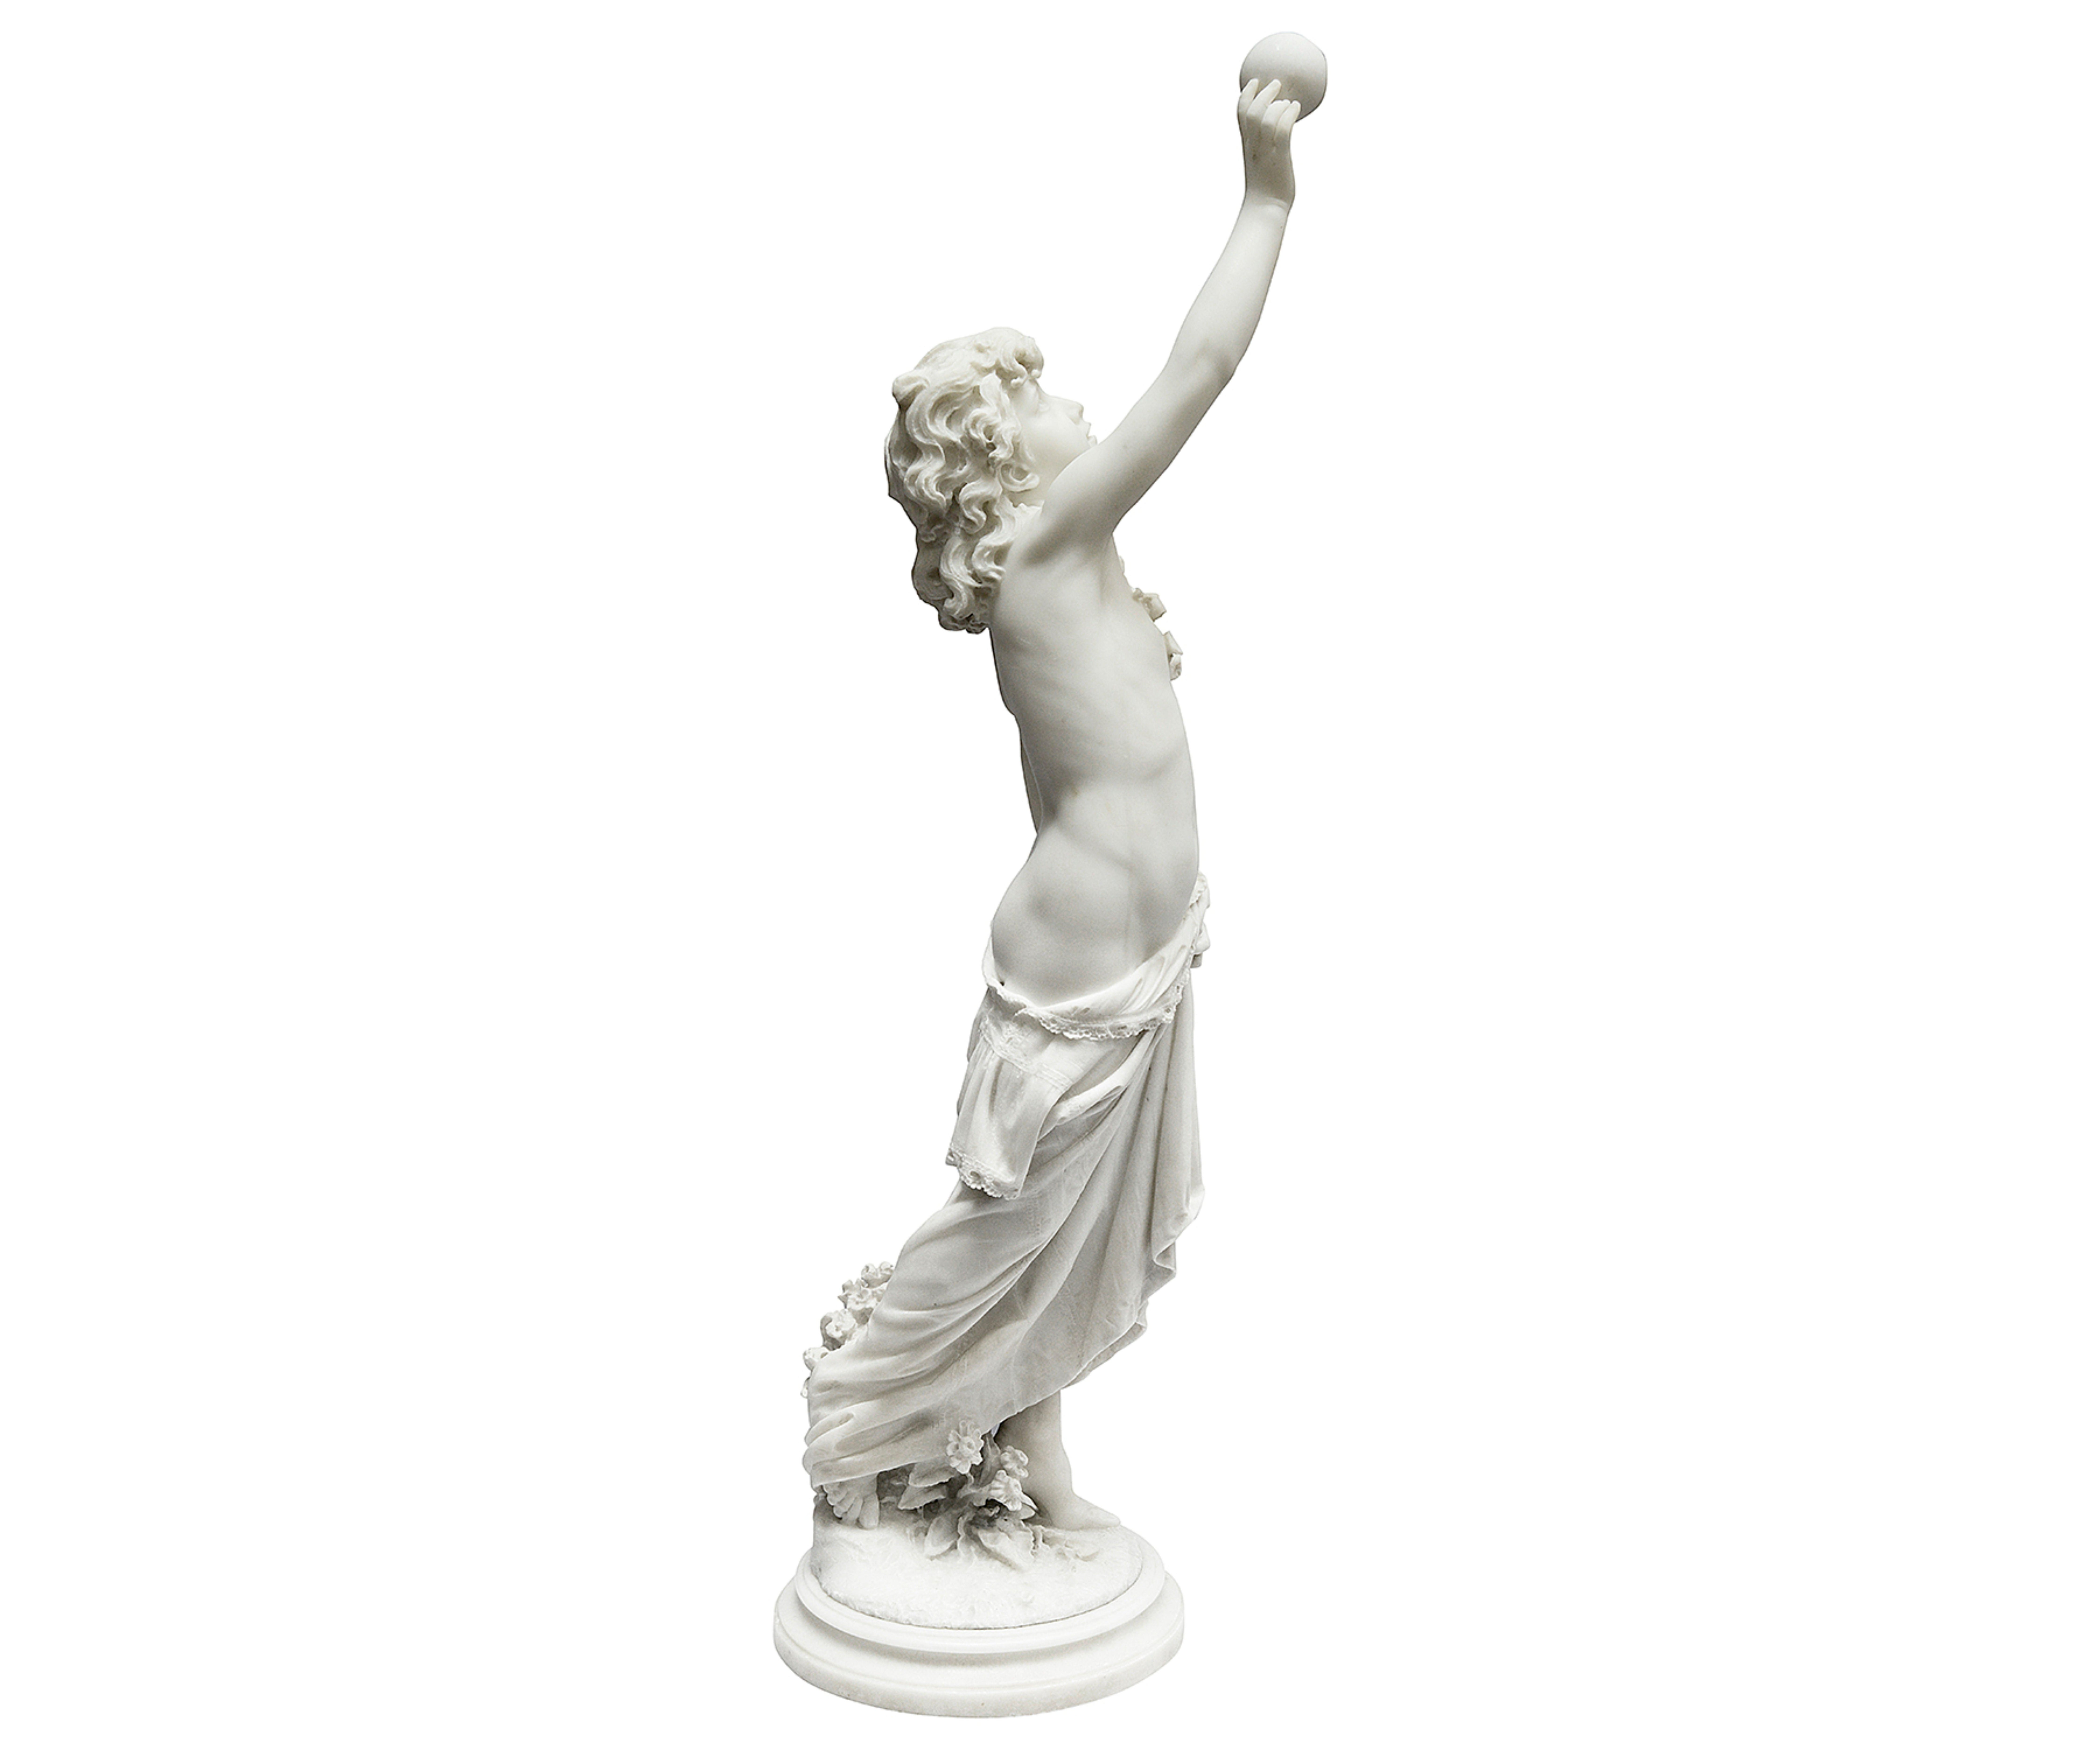 Italian Enchanting marble statue of young girl playing ball, signed Donato Barcaglia